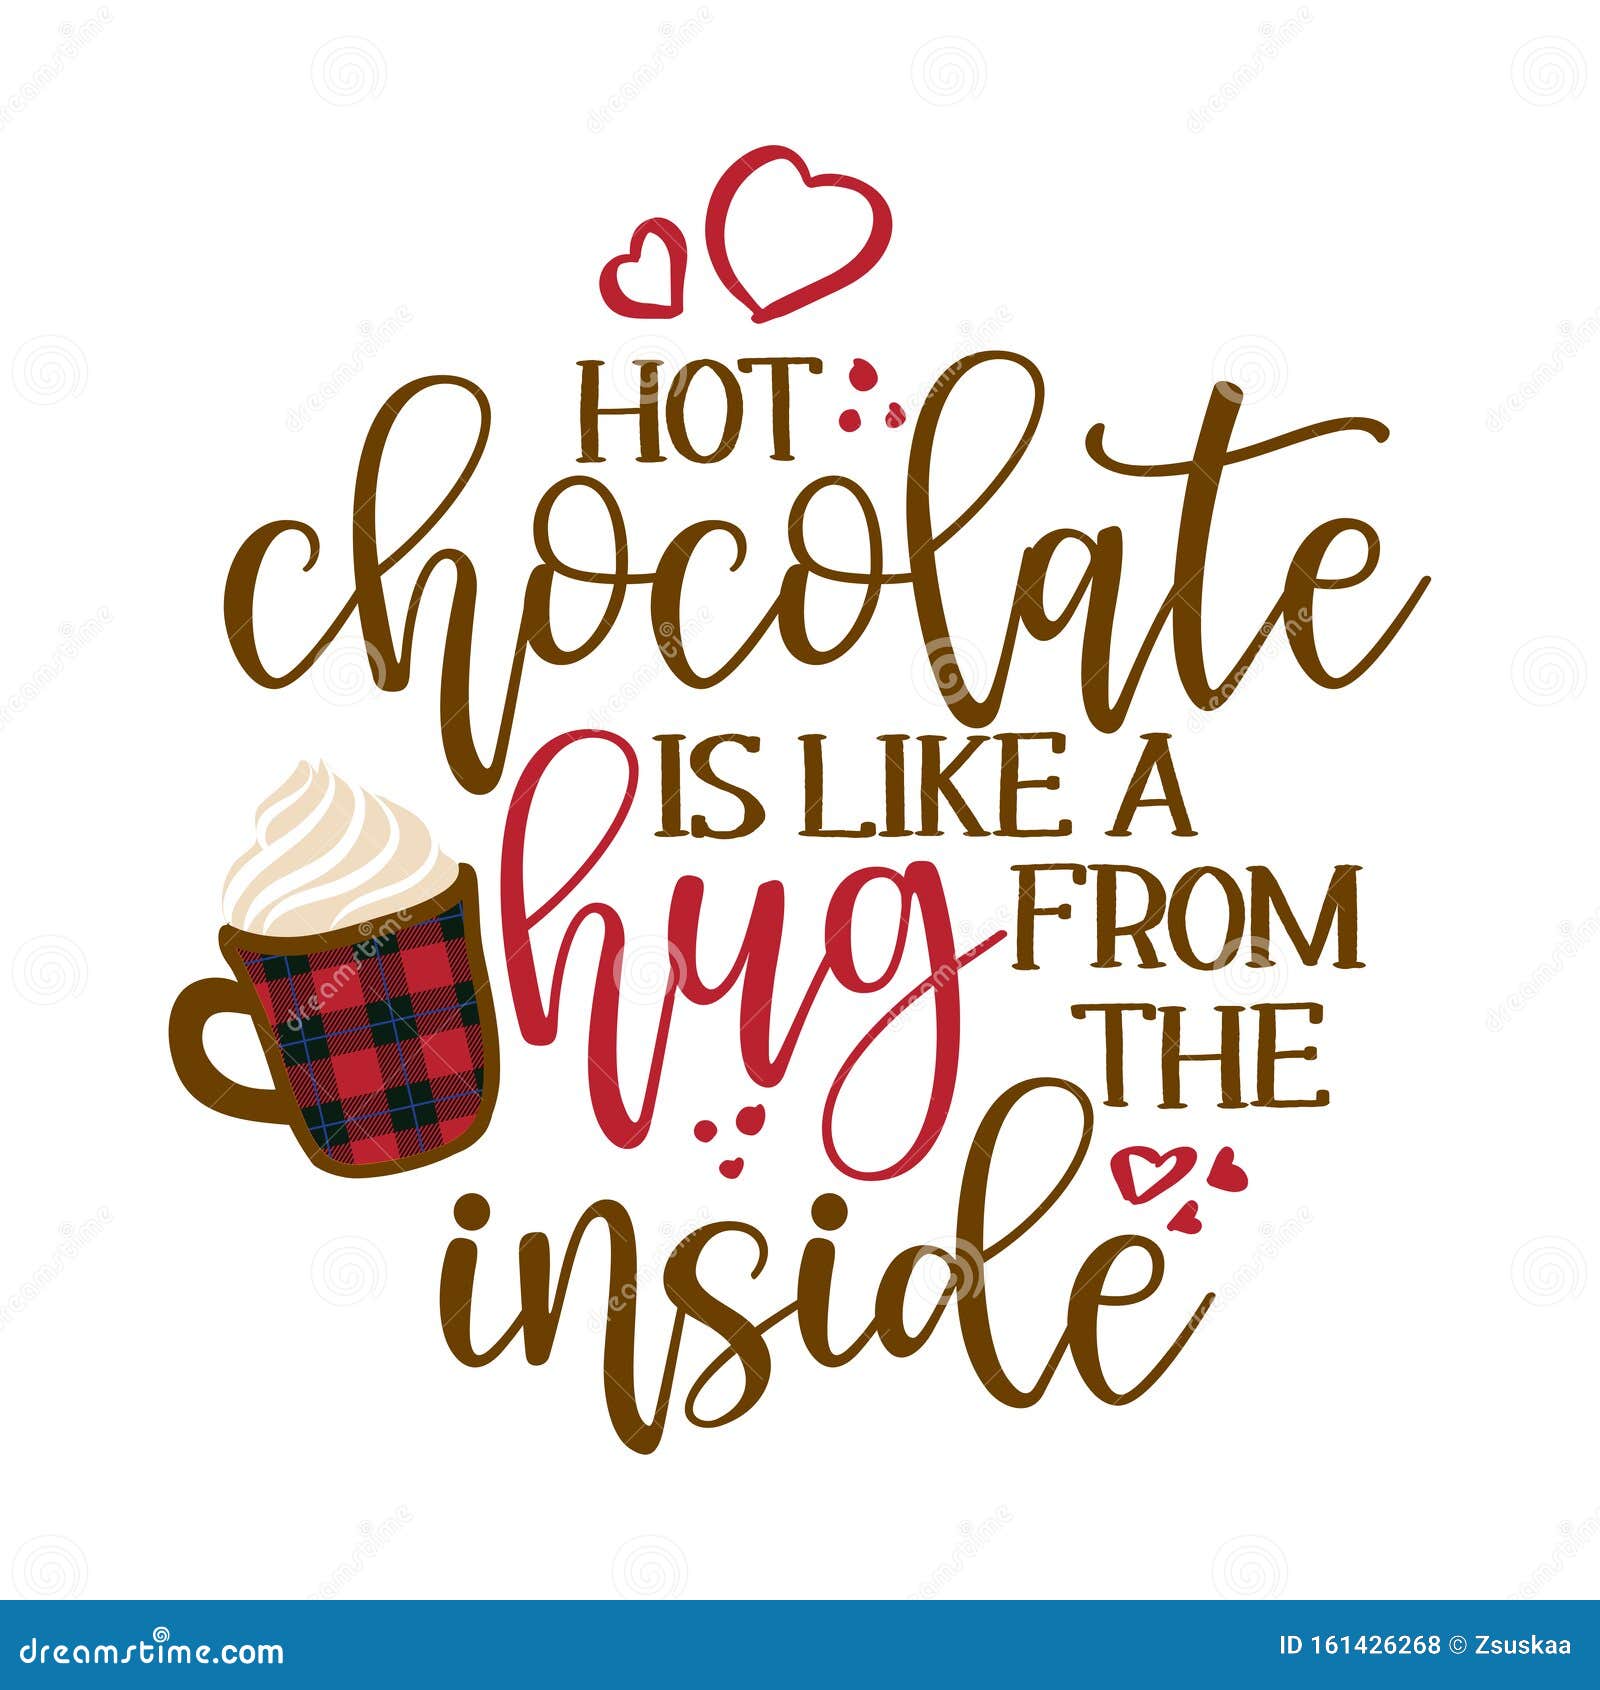 Top 91+ Images hot chocolate is like a hug from the inside Completed